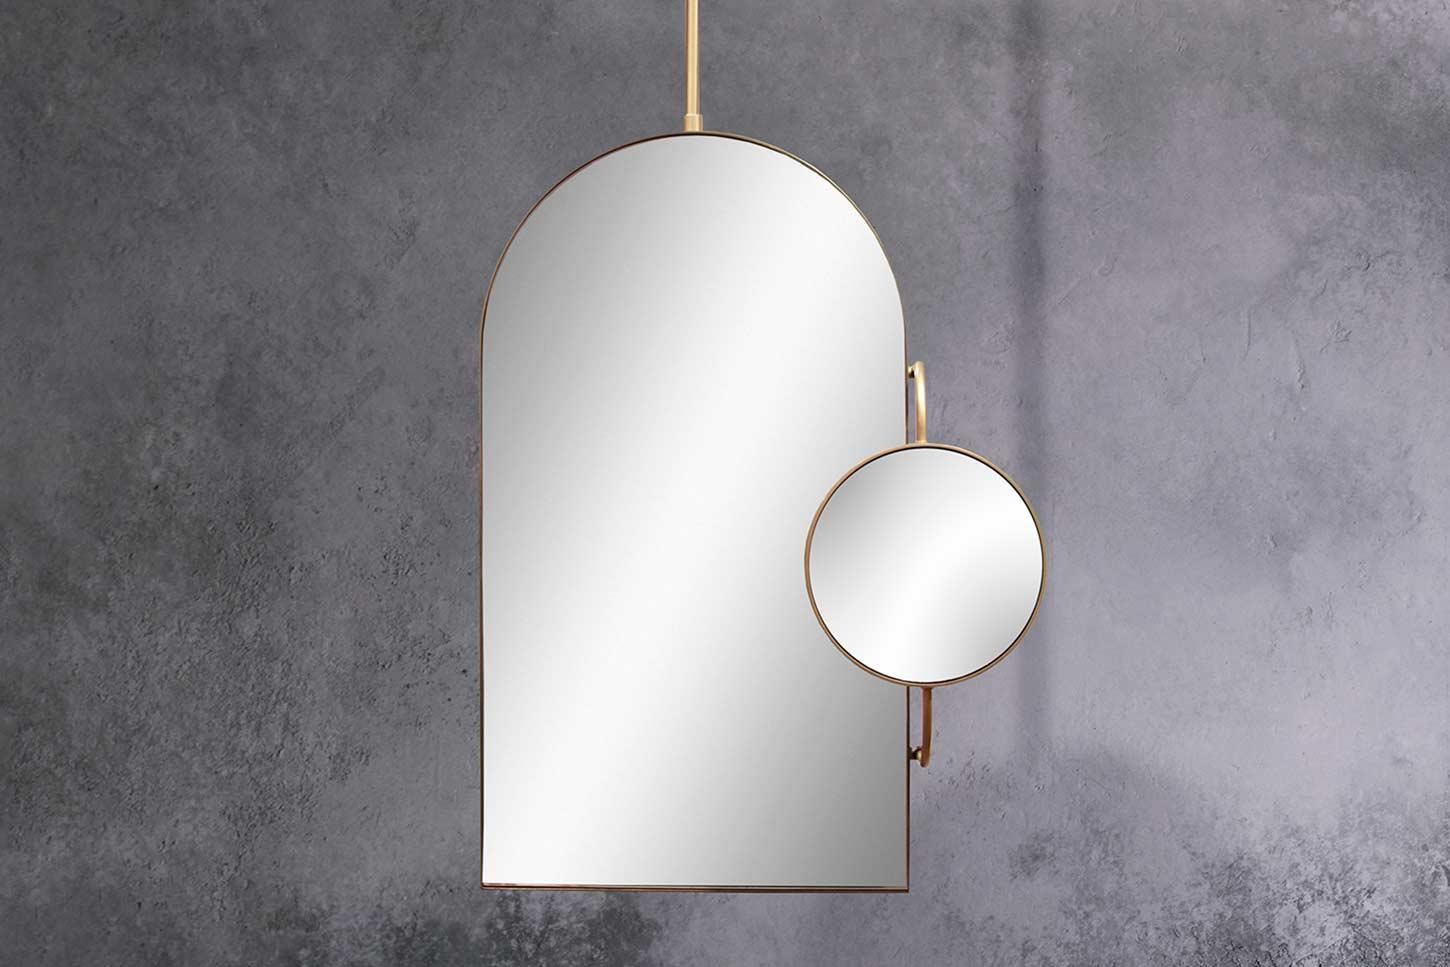 Made to hang from the ceiling, this sculptural piece has an articulated 5x magnifying side mirror.

Note: Mirror must be mounted to the wall as well as the ceiling. Please see Tear Sheet for details.

Materials: Steel, Brass and Mirror